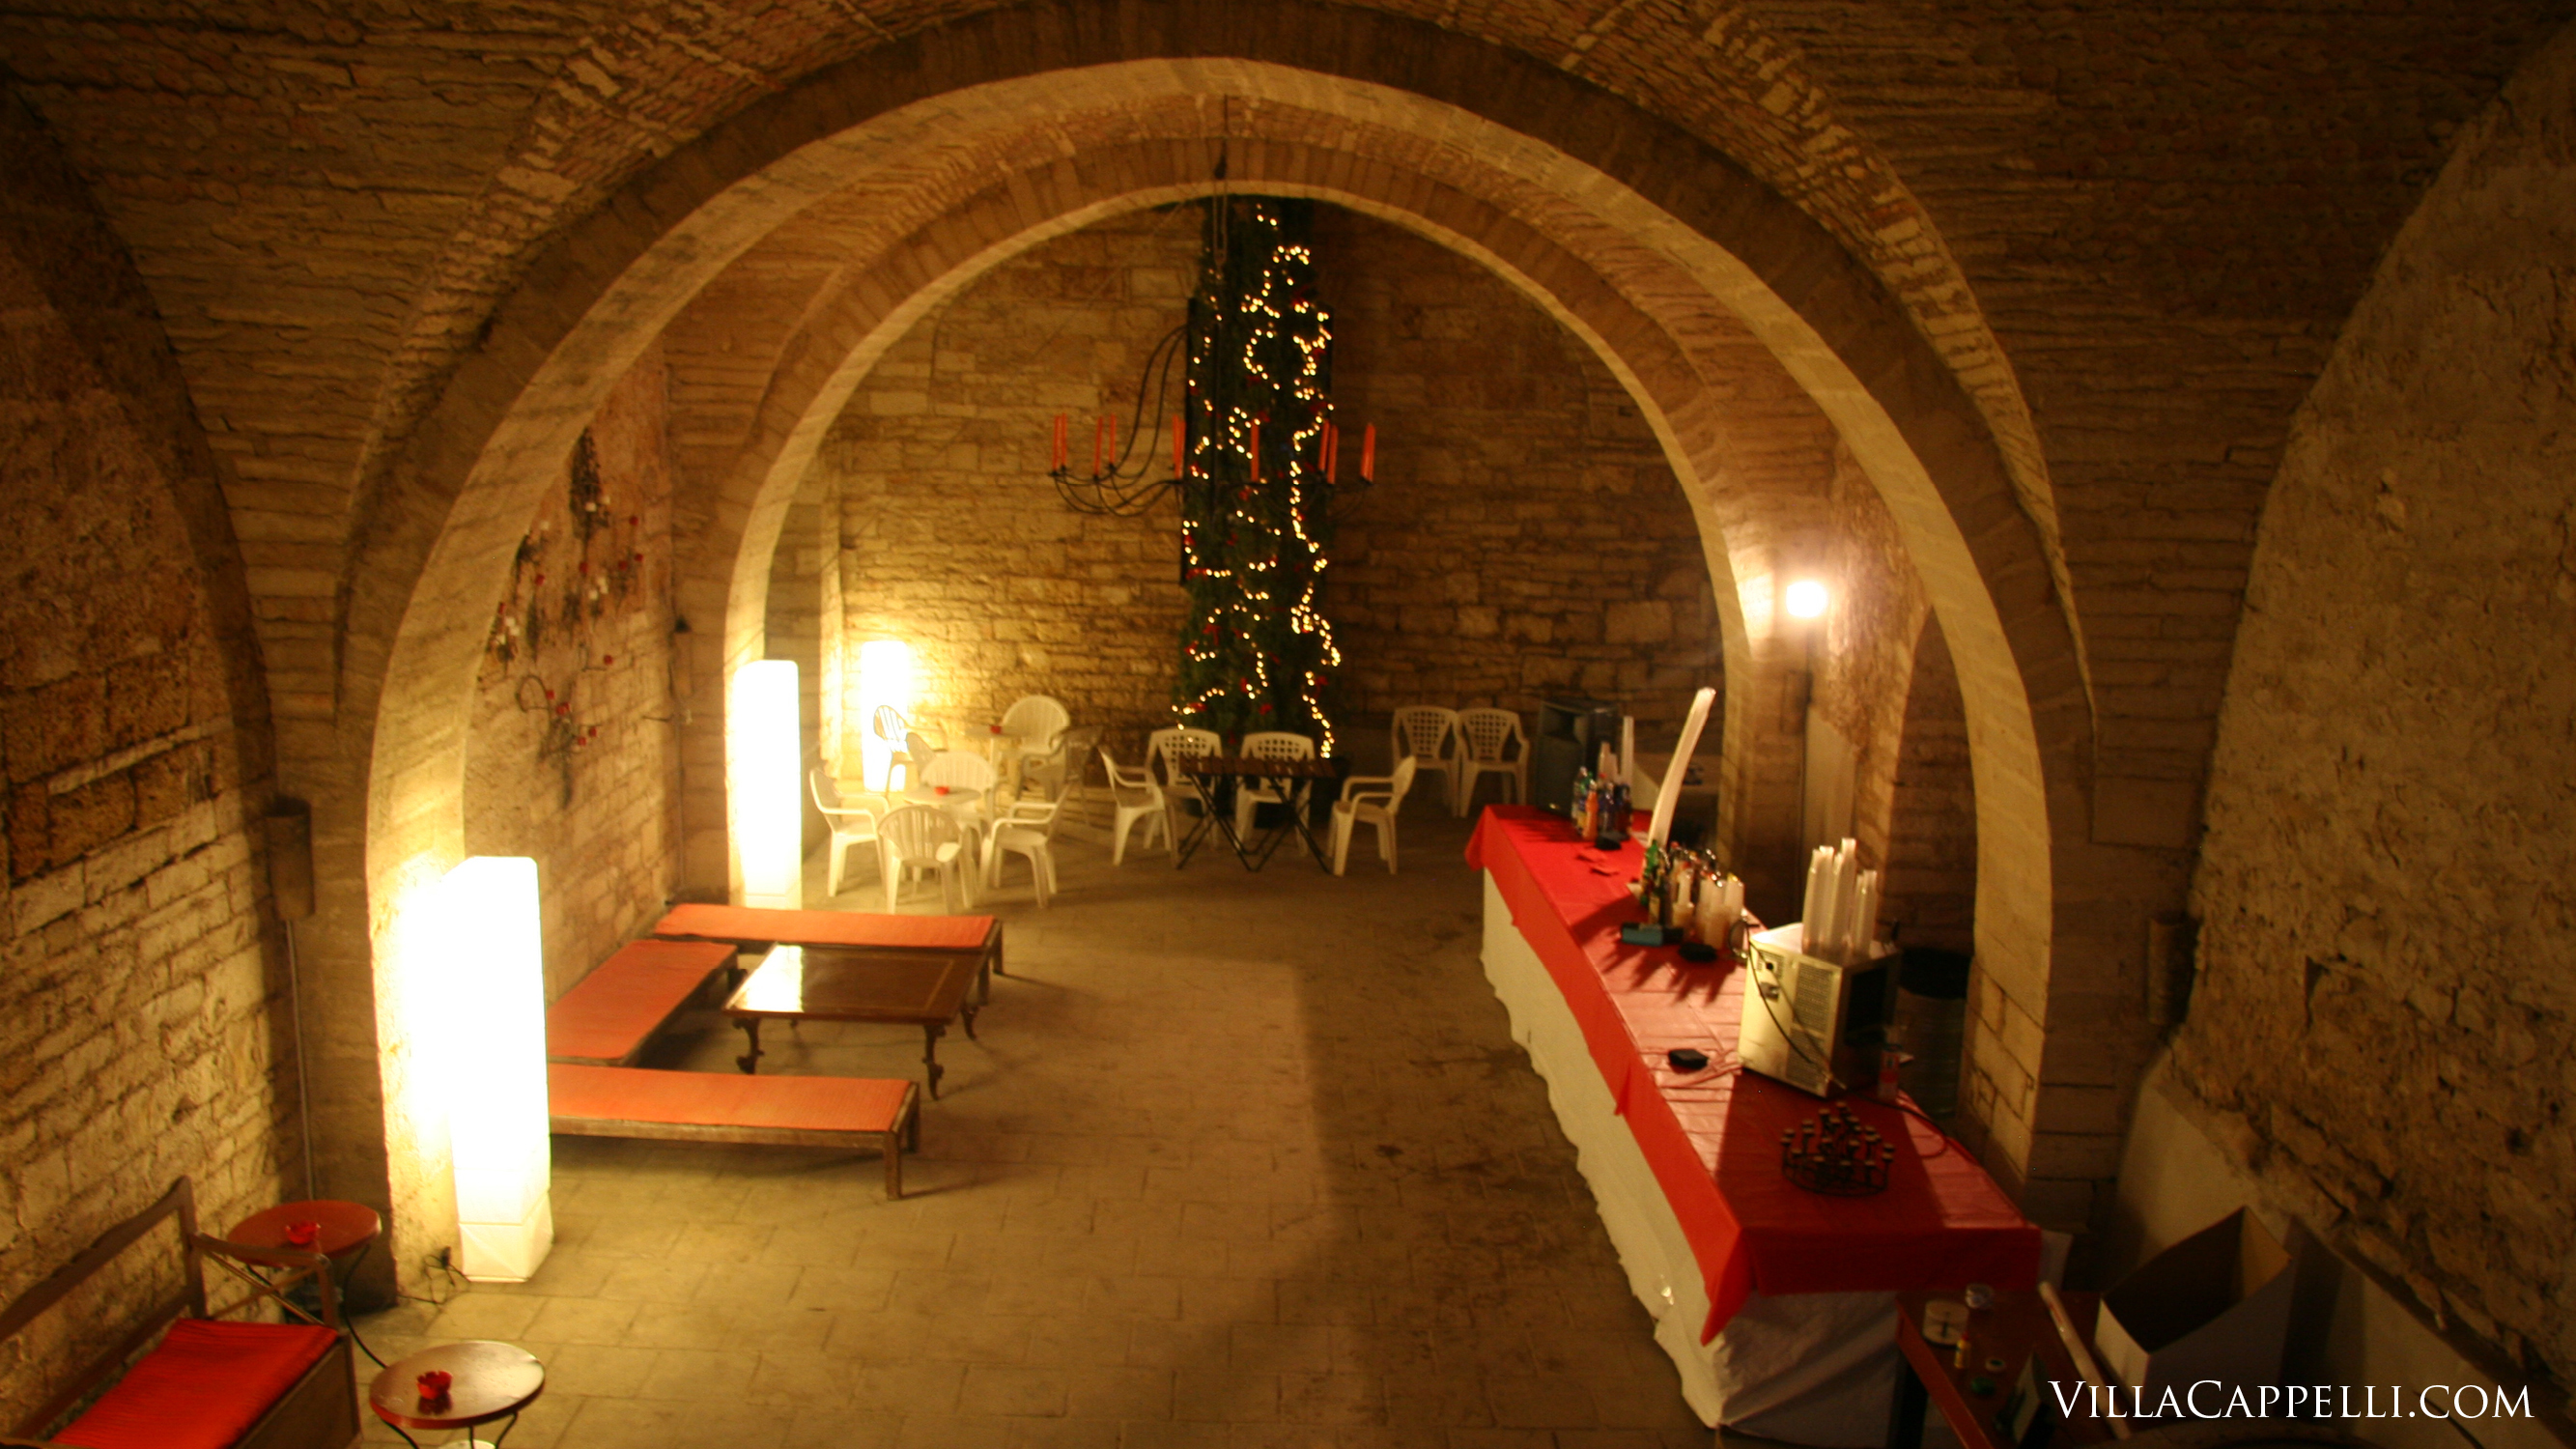 The wine cellar decorated for a Christmas party at Villa Cappelli.